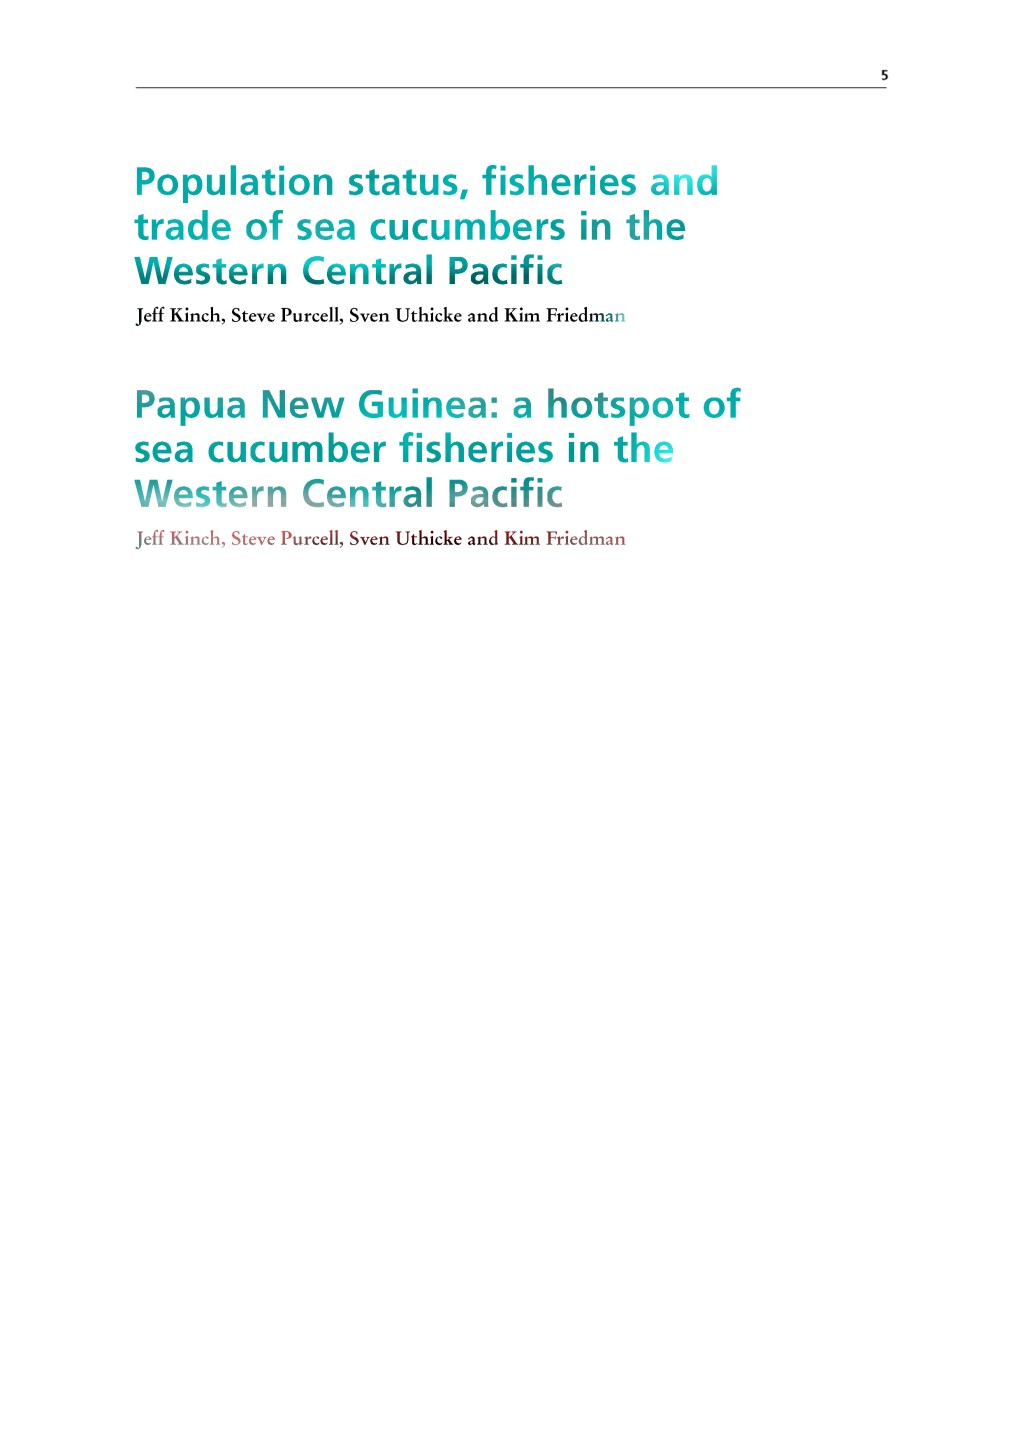 Population Status, Fisheries and Trade of Sea Cucumbers in the Western Central Pacific Jeff Kinch, Steve Purcell, Sven Uthicke and Kim Friedman